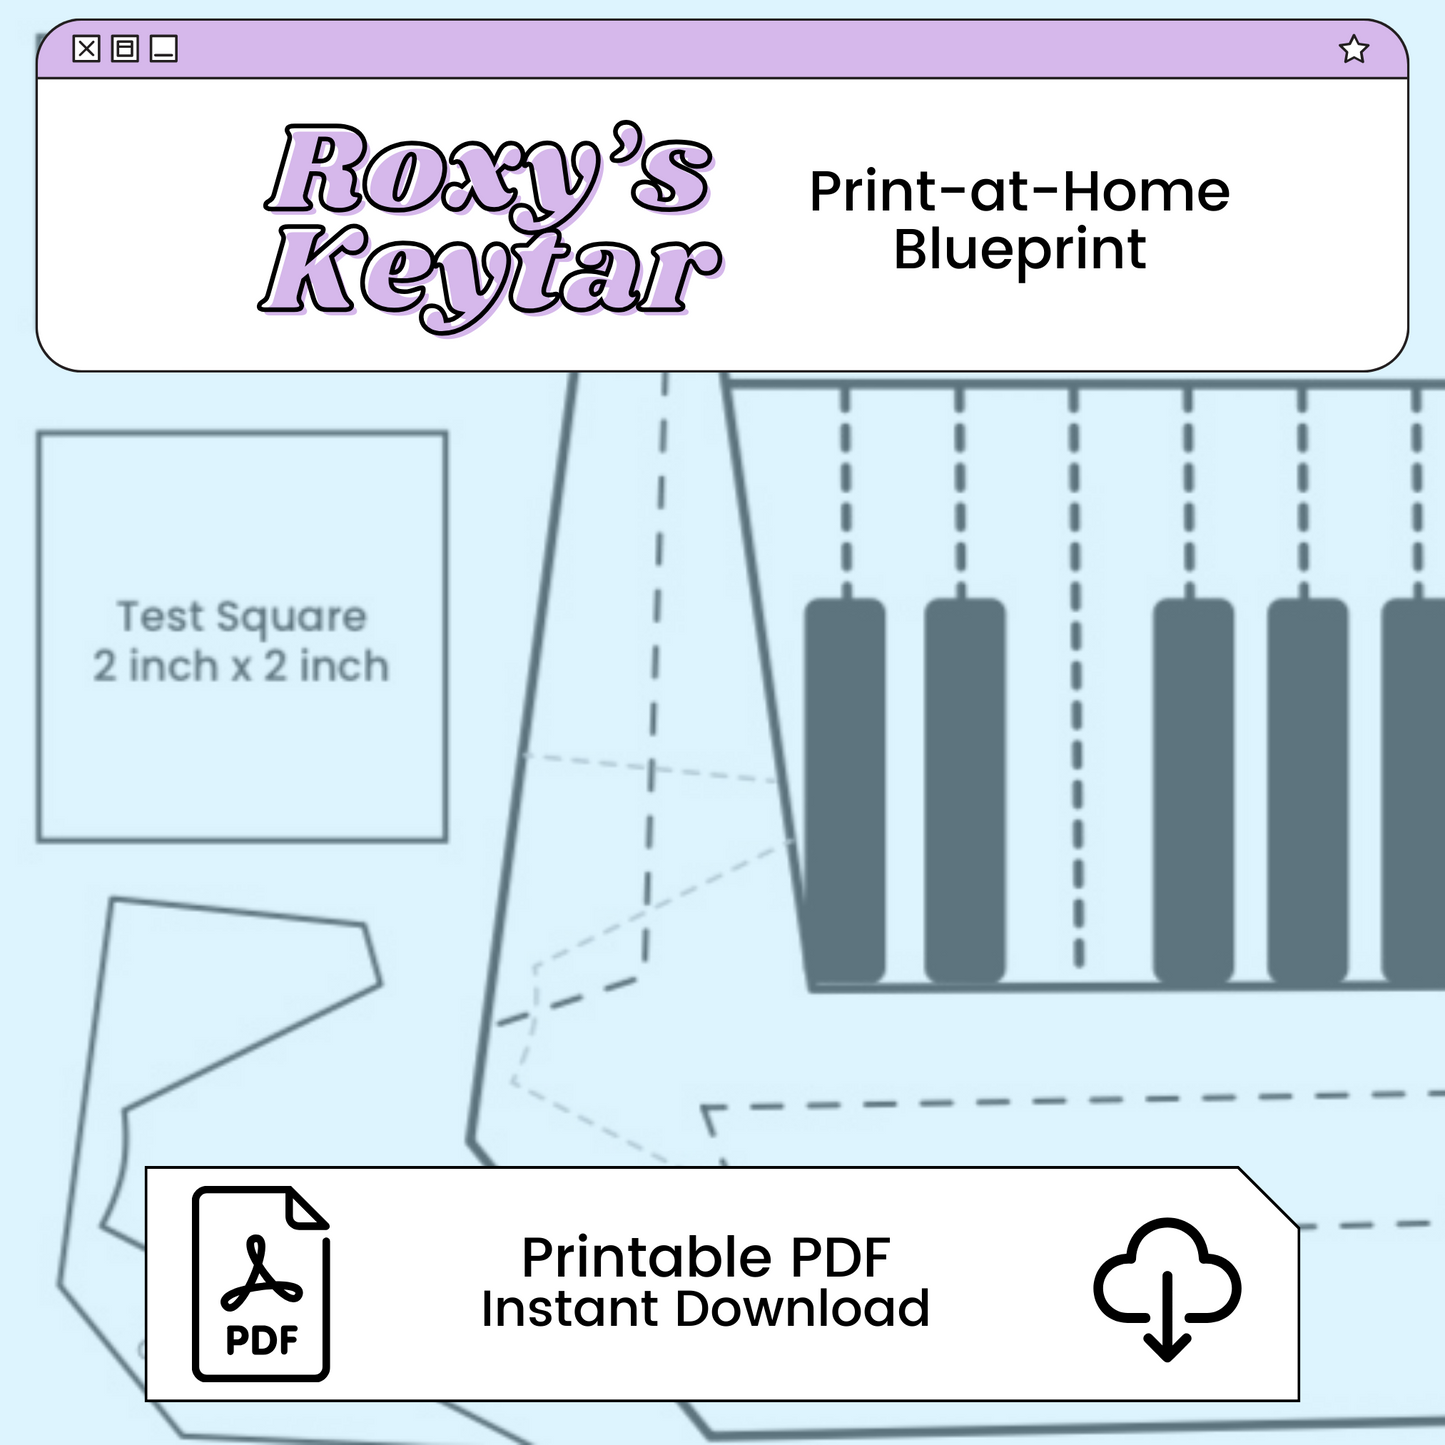 Roxy's Keytar Printable Cosplay Blueprint | Inspired by Five Nights at Freddy's